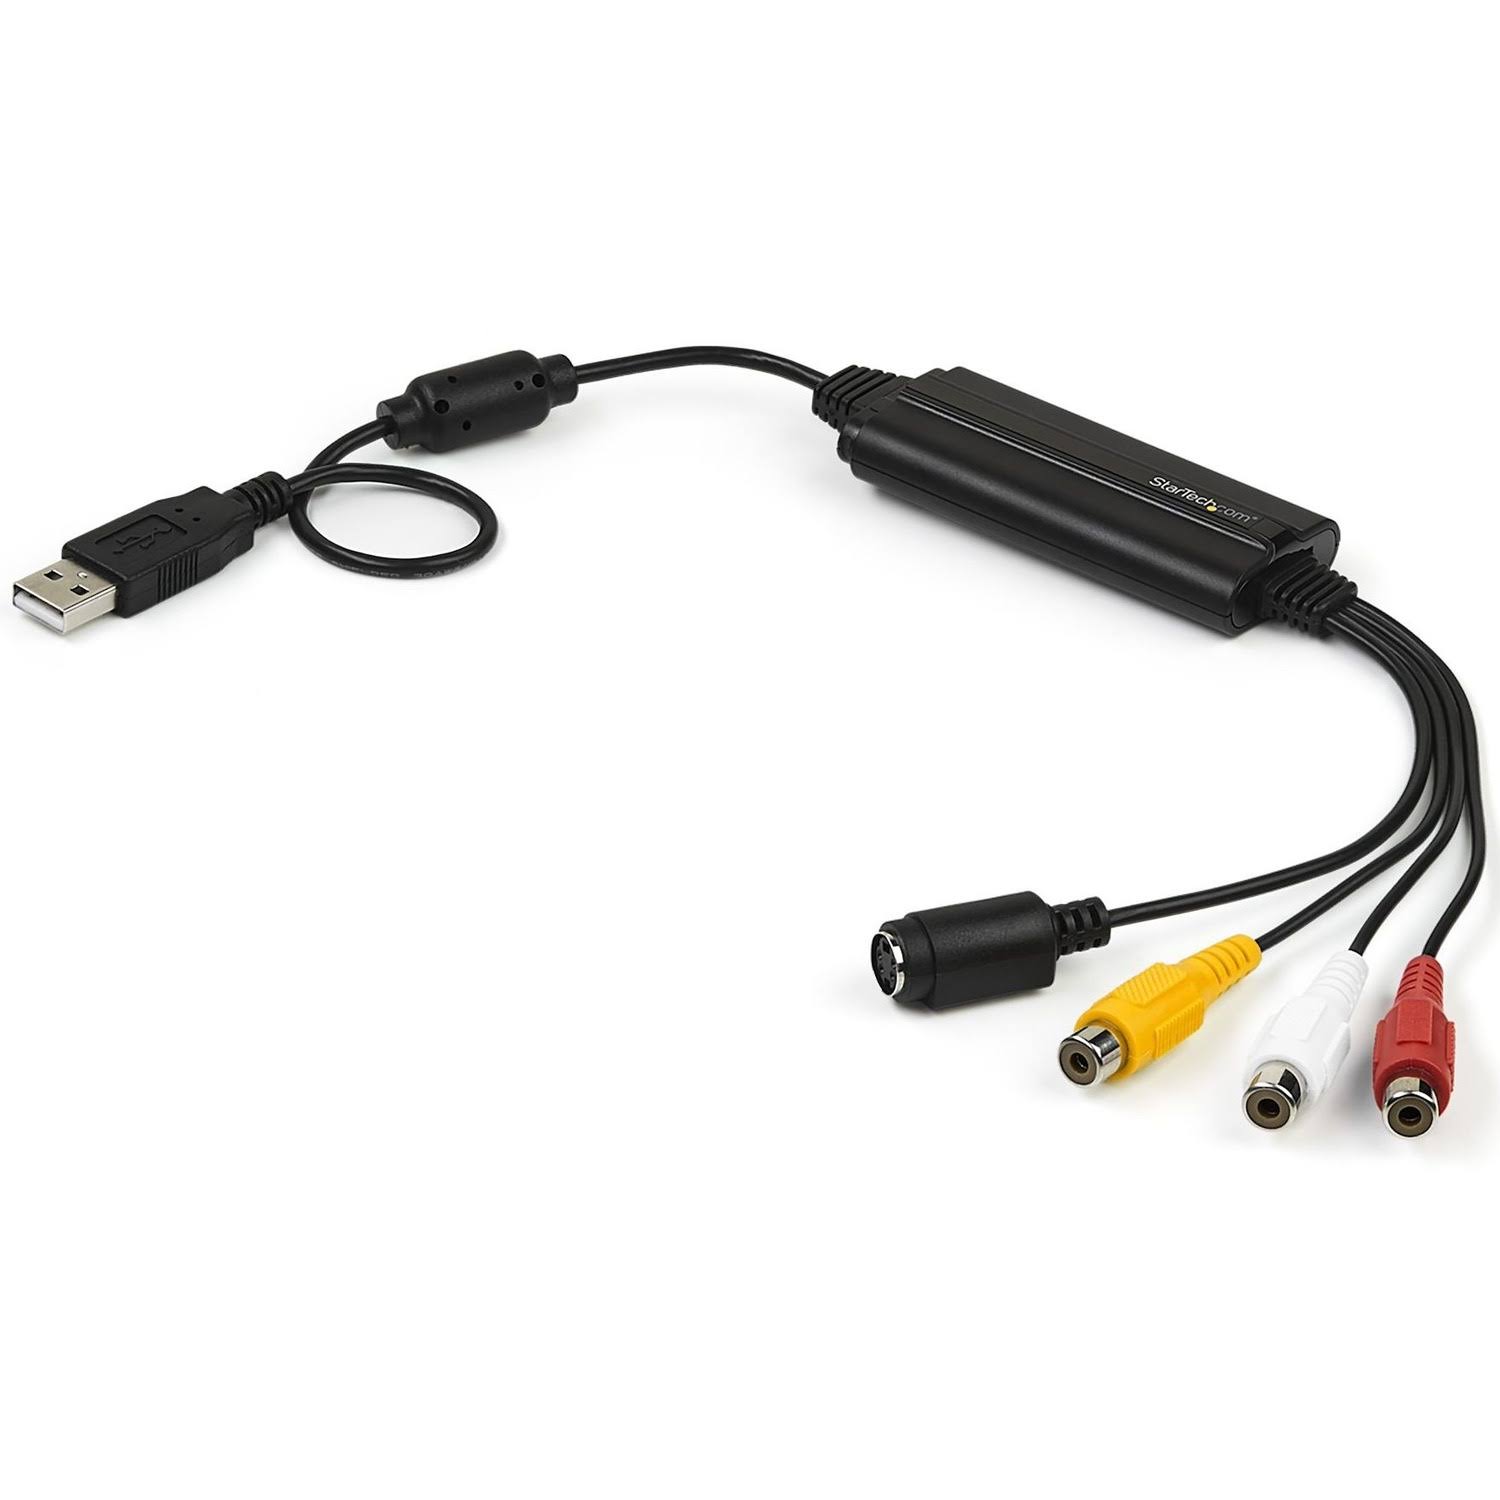 StarTech.com USB Video Capture Adapter Cable - S-Video/Composite to USB 2.0